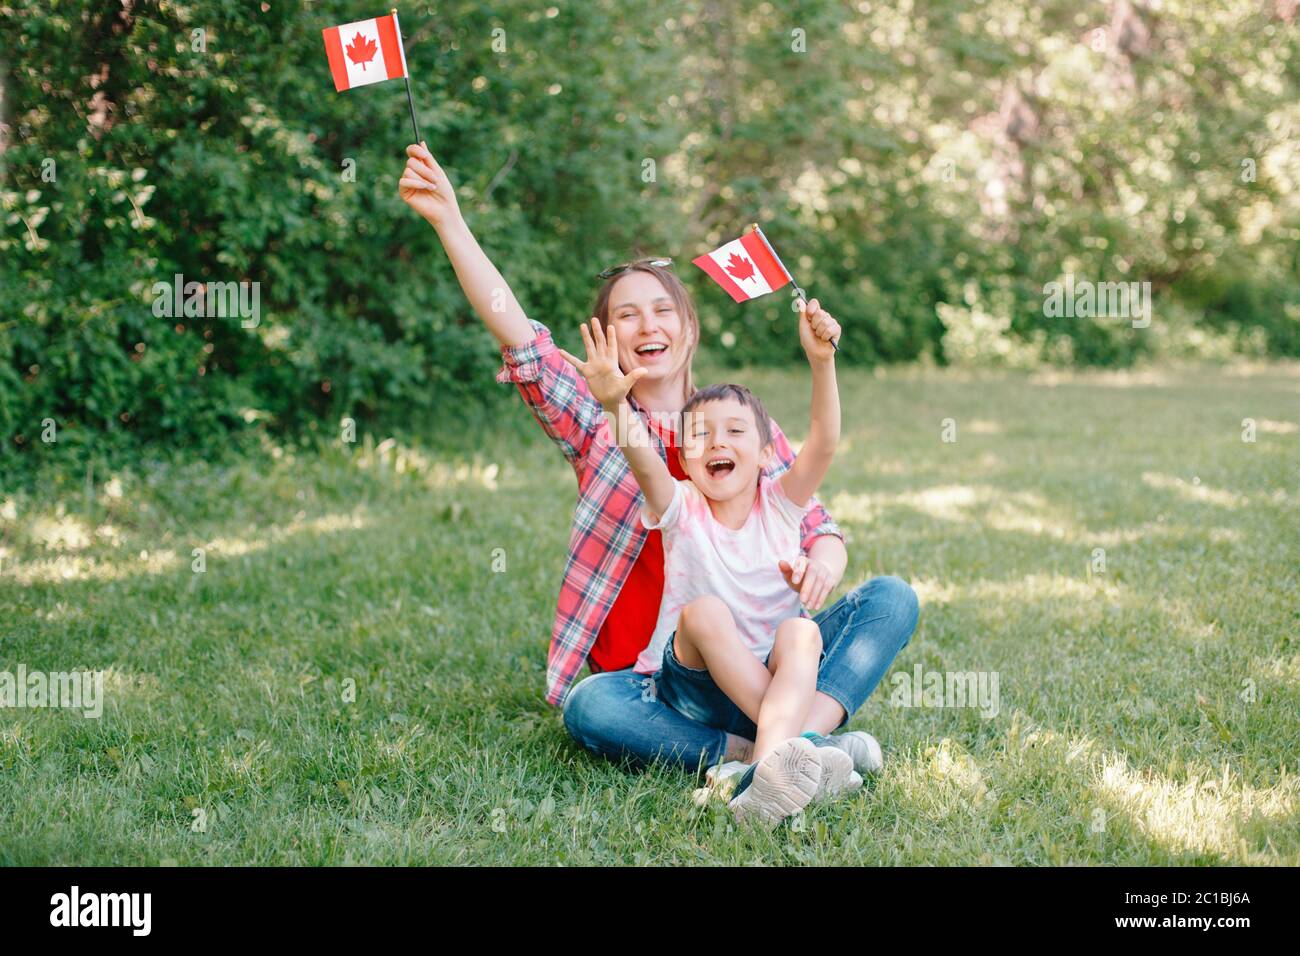 Family mom with son celebrating national Canada Day on 1st of July